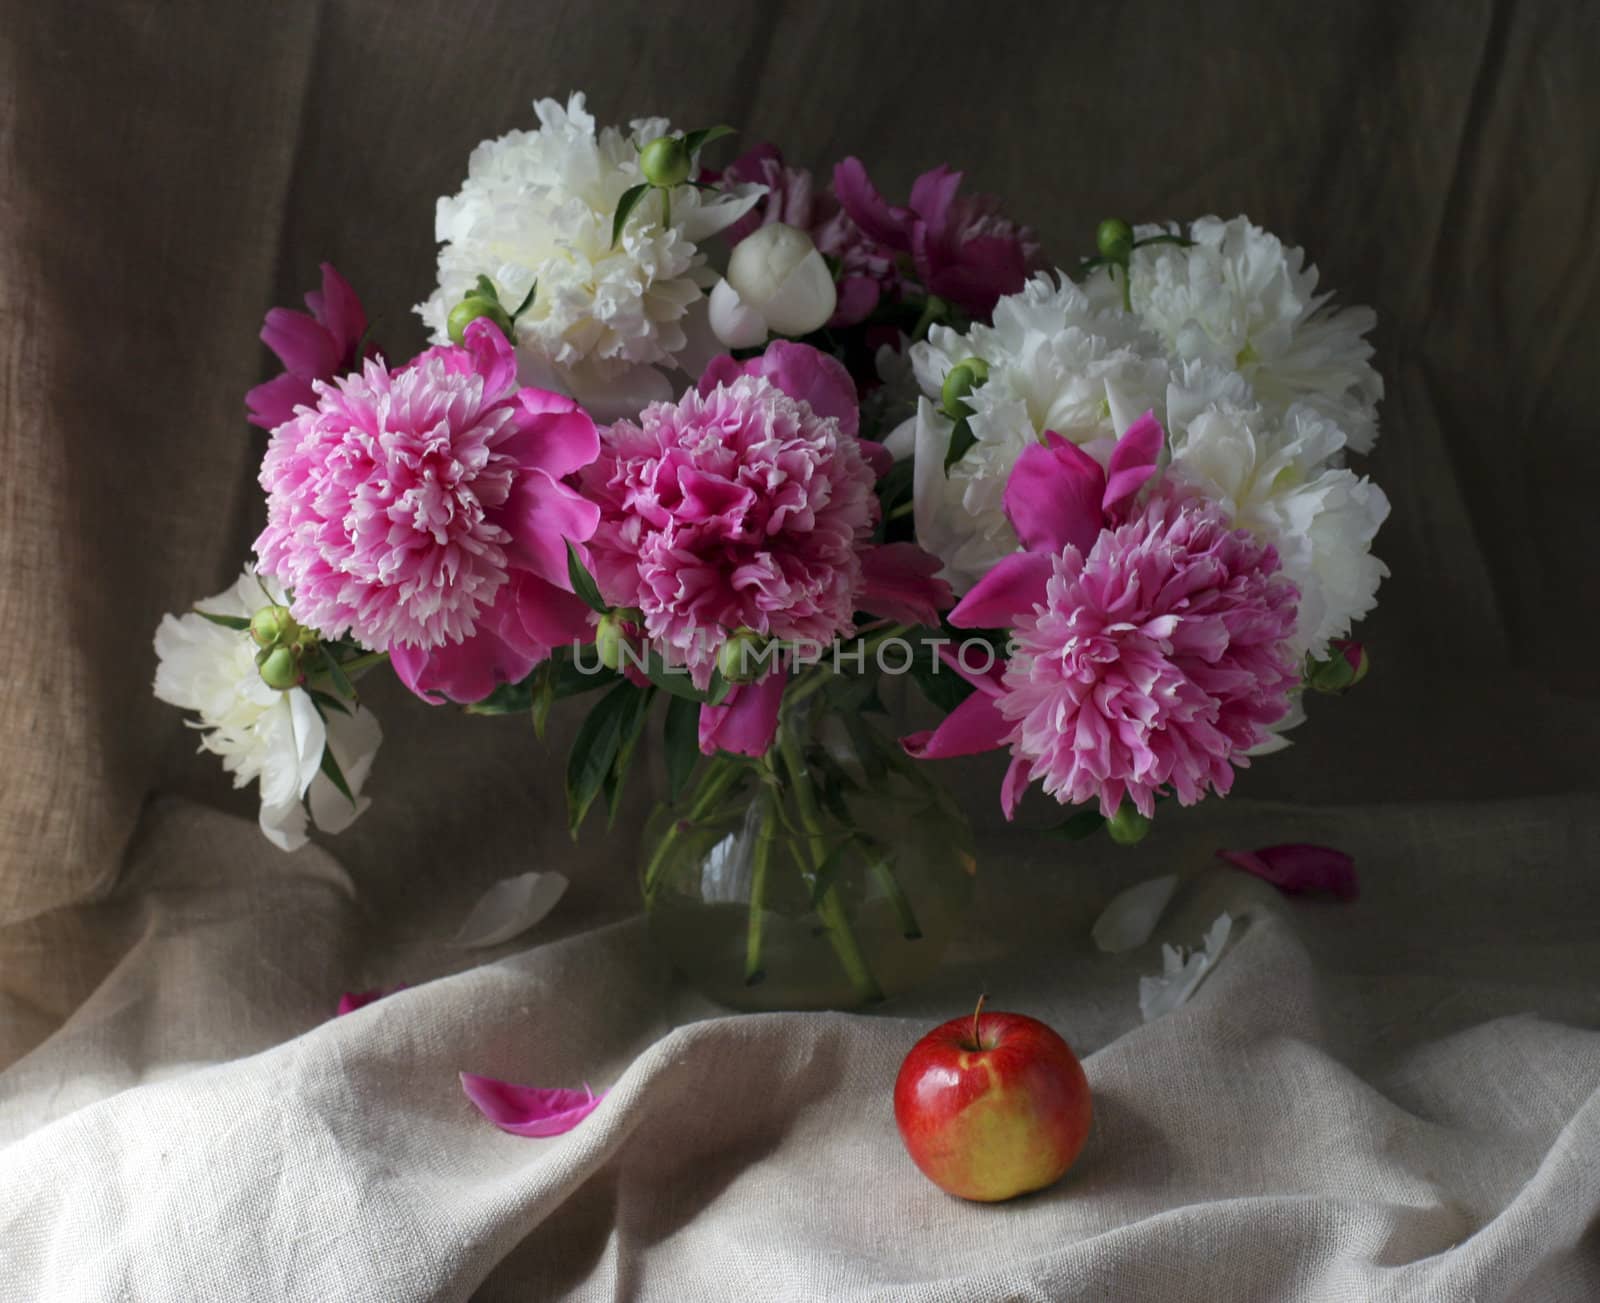 Flowers and apple on the table in house interior